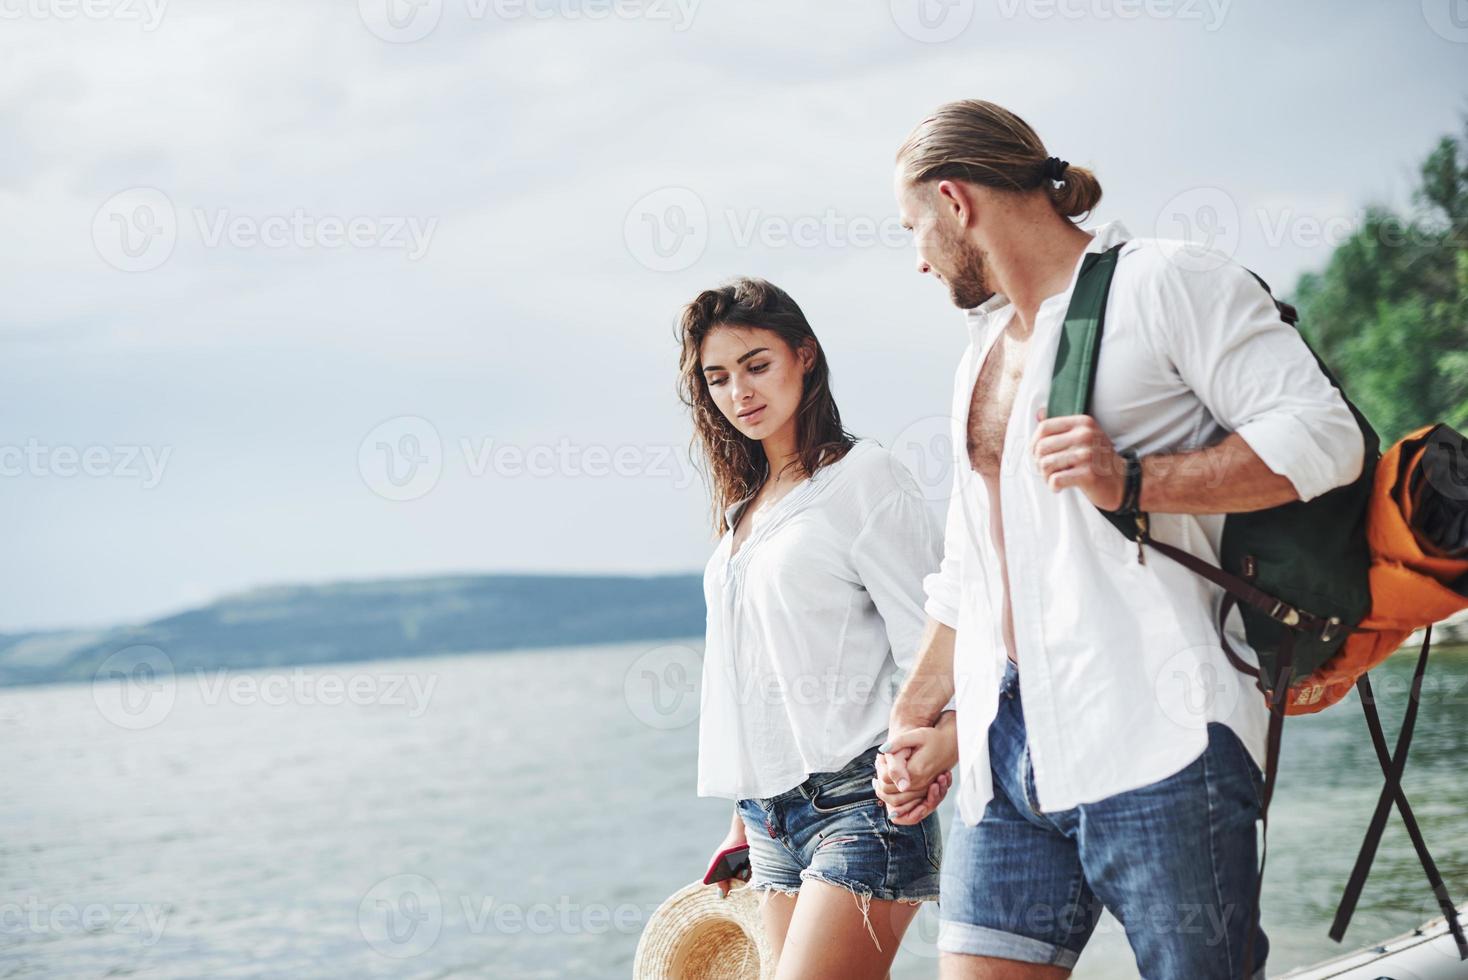 Cheerful walk of lovely couple on the outdoor at lake background photo